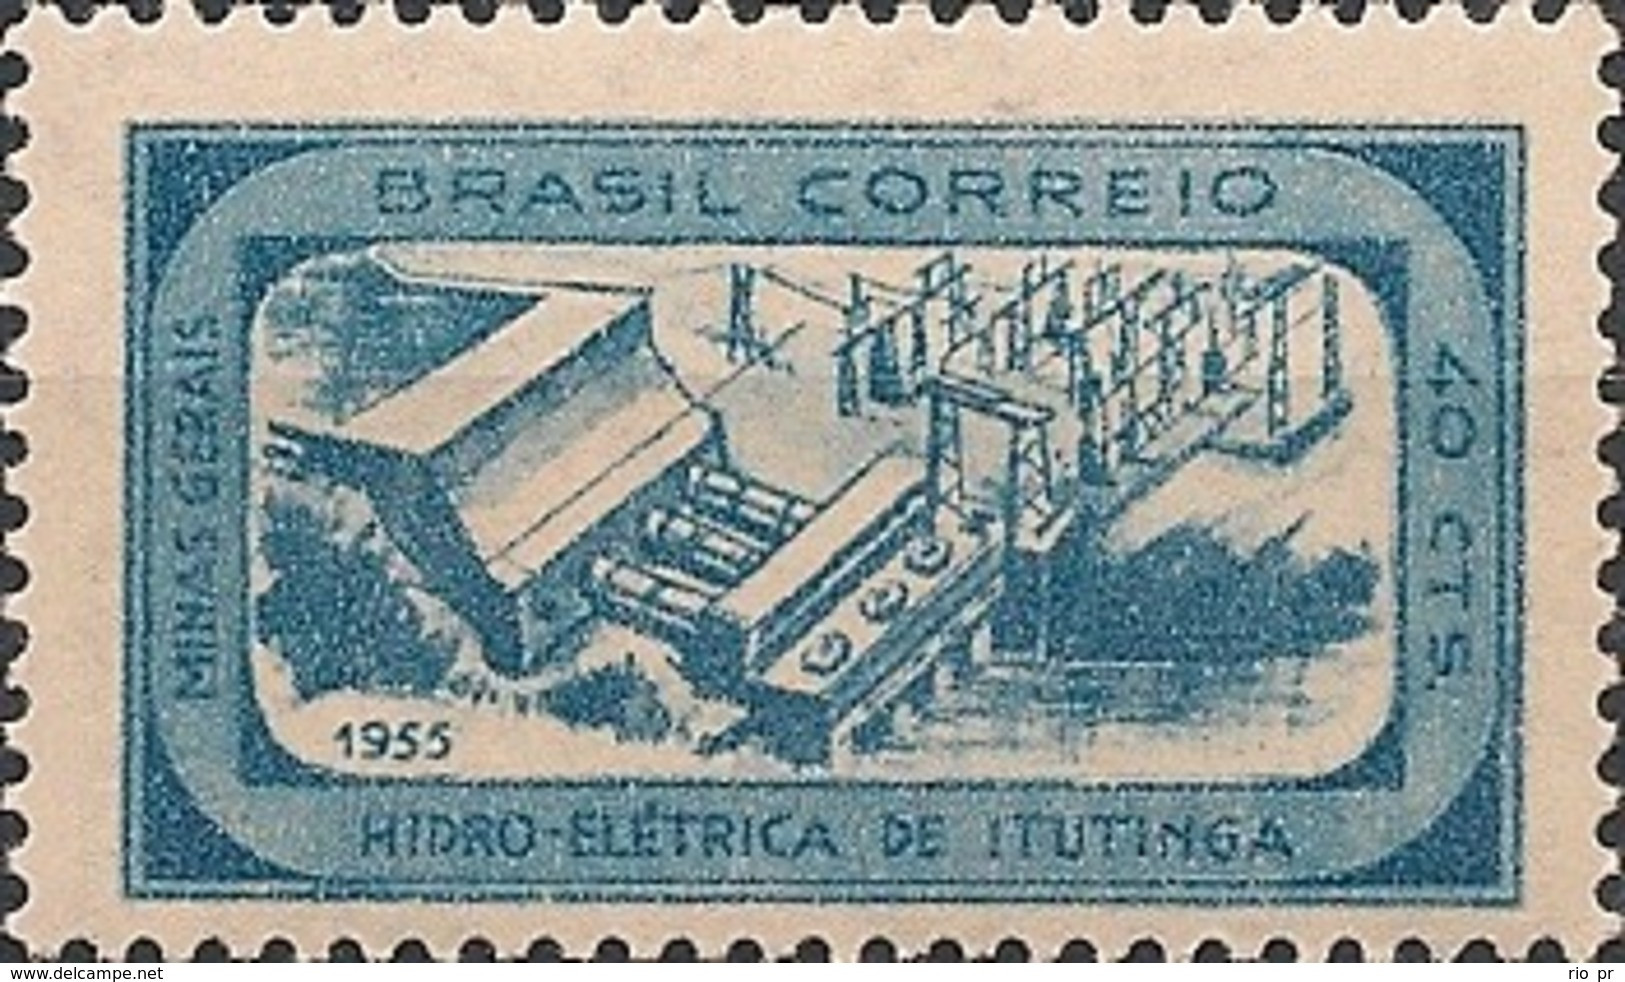 BRAZIL - INAUGURATION OF THE ITUTINGA HYDROELECTRIC PLANT AT LAVRAS 1955 - MNH - Agua